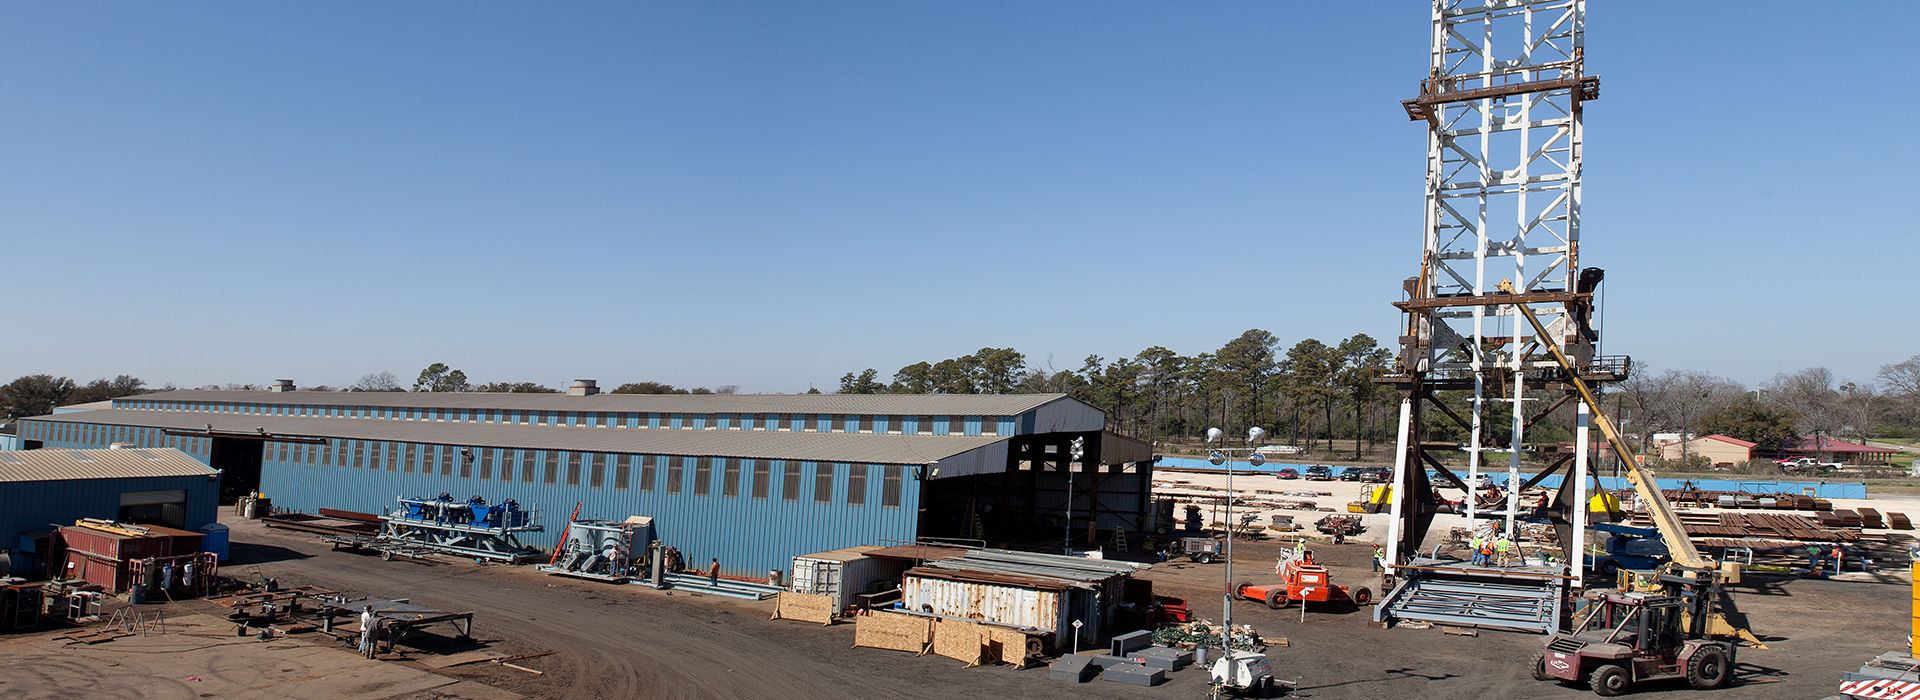 Panoramic view featuring Aker KFELS mast manufacturing and installation location